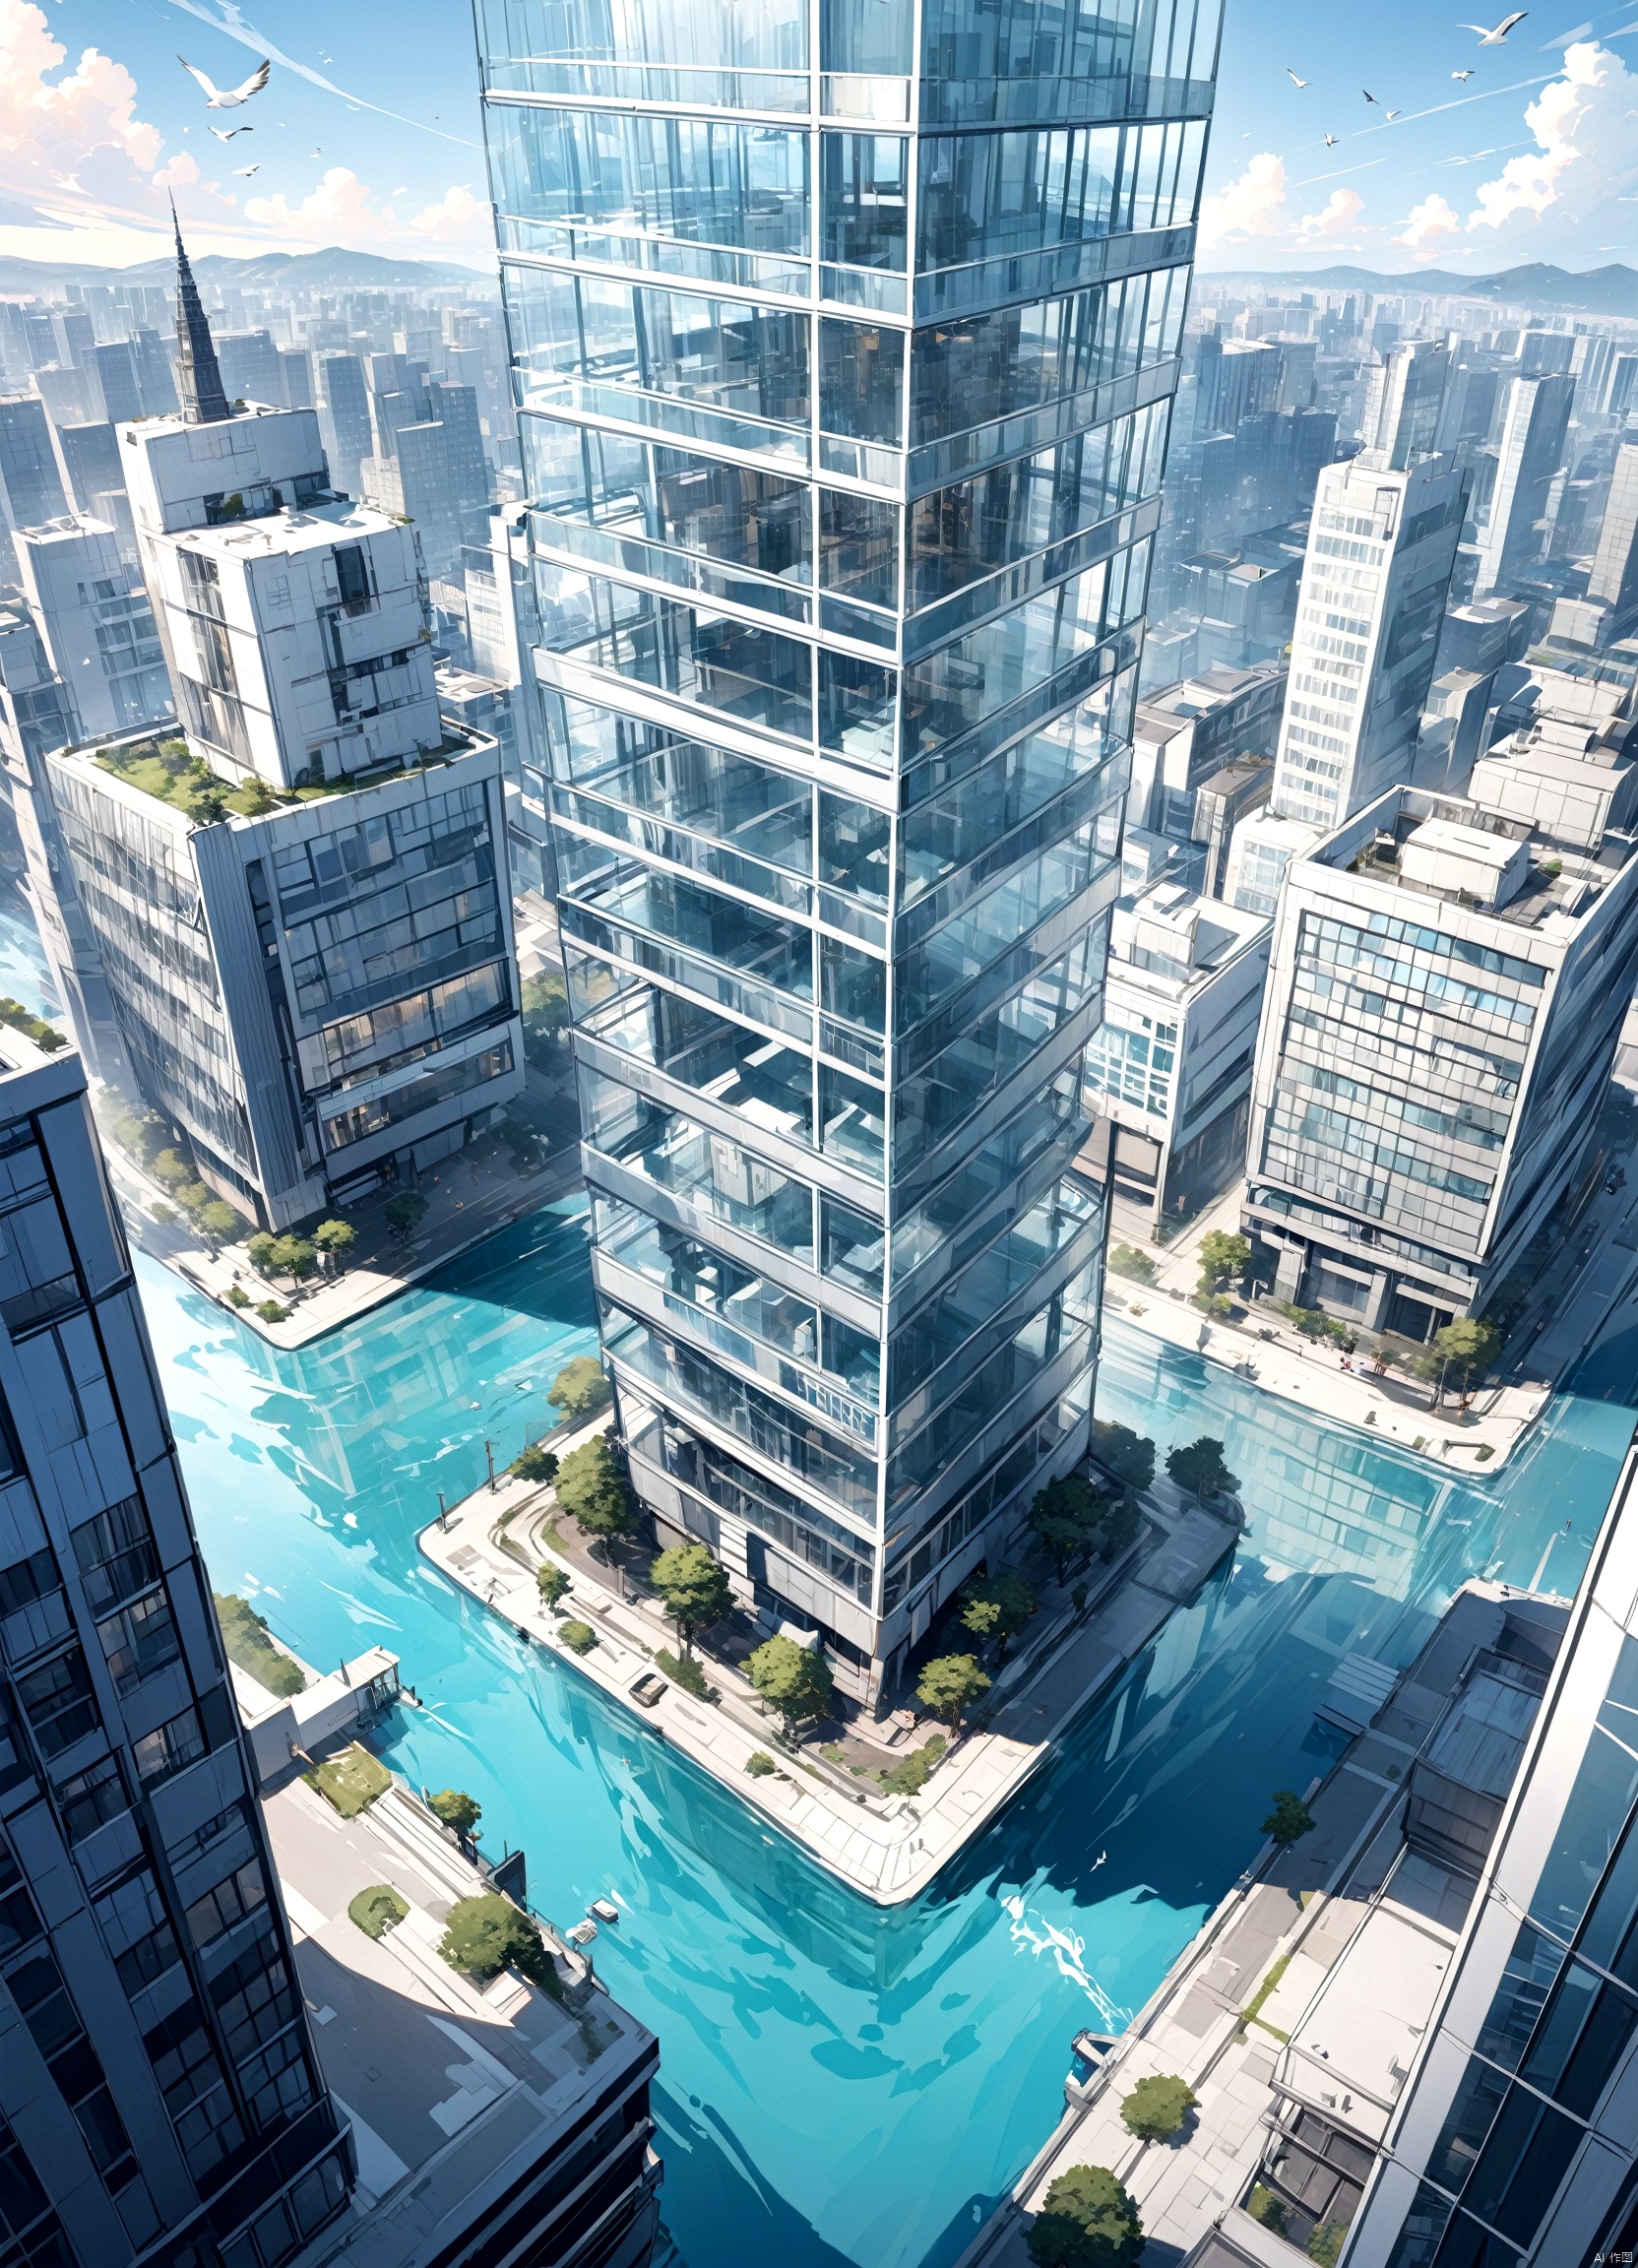  Bird's-eye view, high-definition, water surface, urban, commercial, tower, glass curtain wall, modern architecture